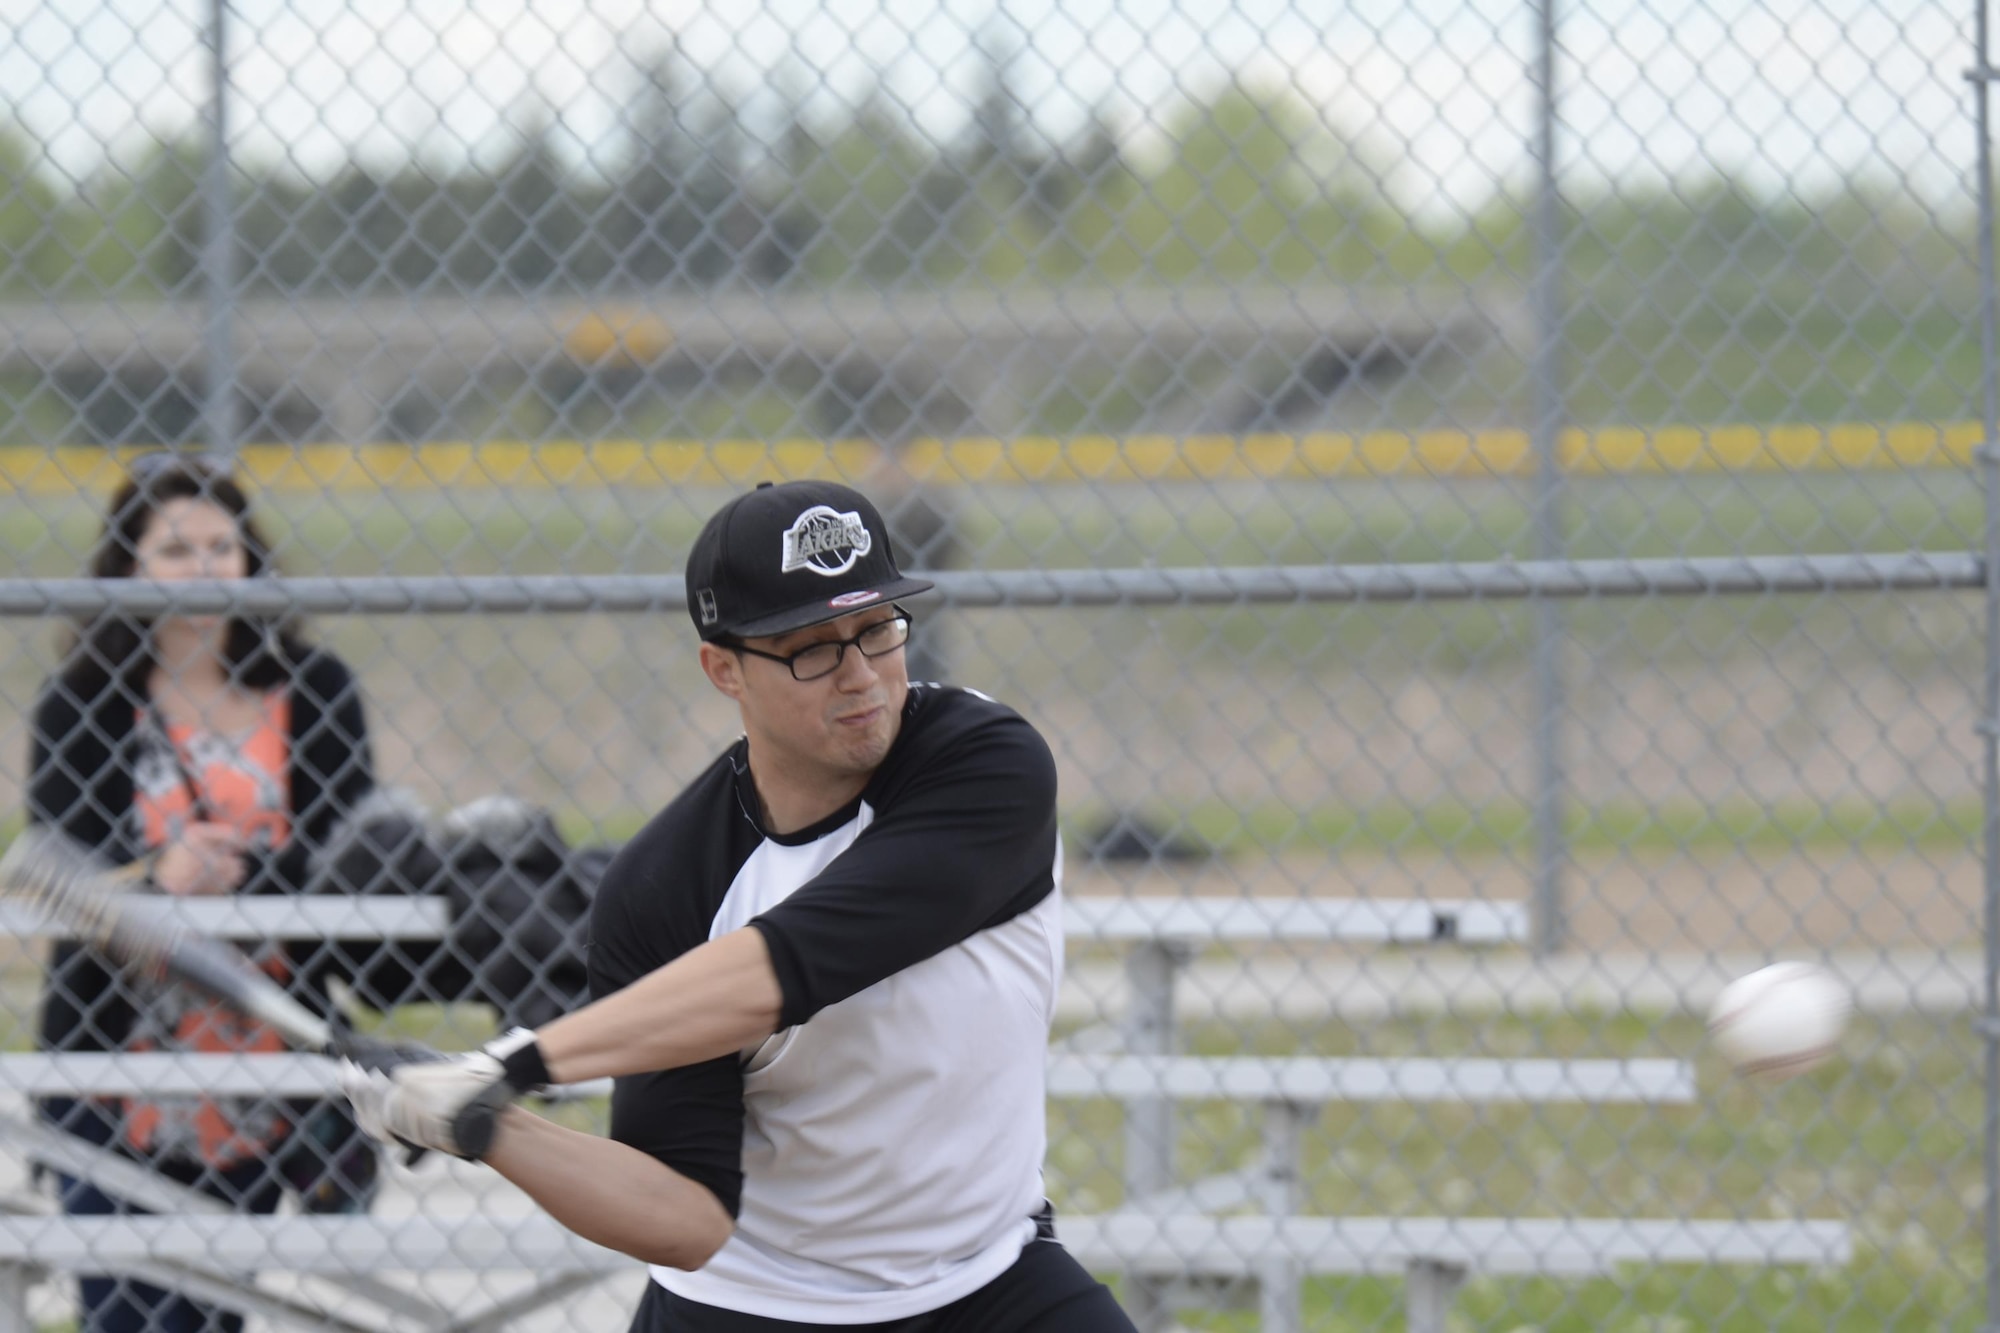 Joseph Cisneros, 790th Missile Security Forces Squadron intramural softball team player, takes a swing at the ball on one of the F.E. Warren Air Force Base, Wyo., ball fields May 31, 2016. The 790 team kept fighting until the end, but their team lost against the 90th Munitions Squadron team 9 to 21. (U.S. Air Force photo by Senior Airman Jason Wiese)